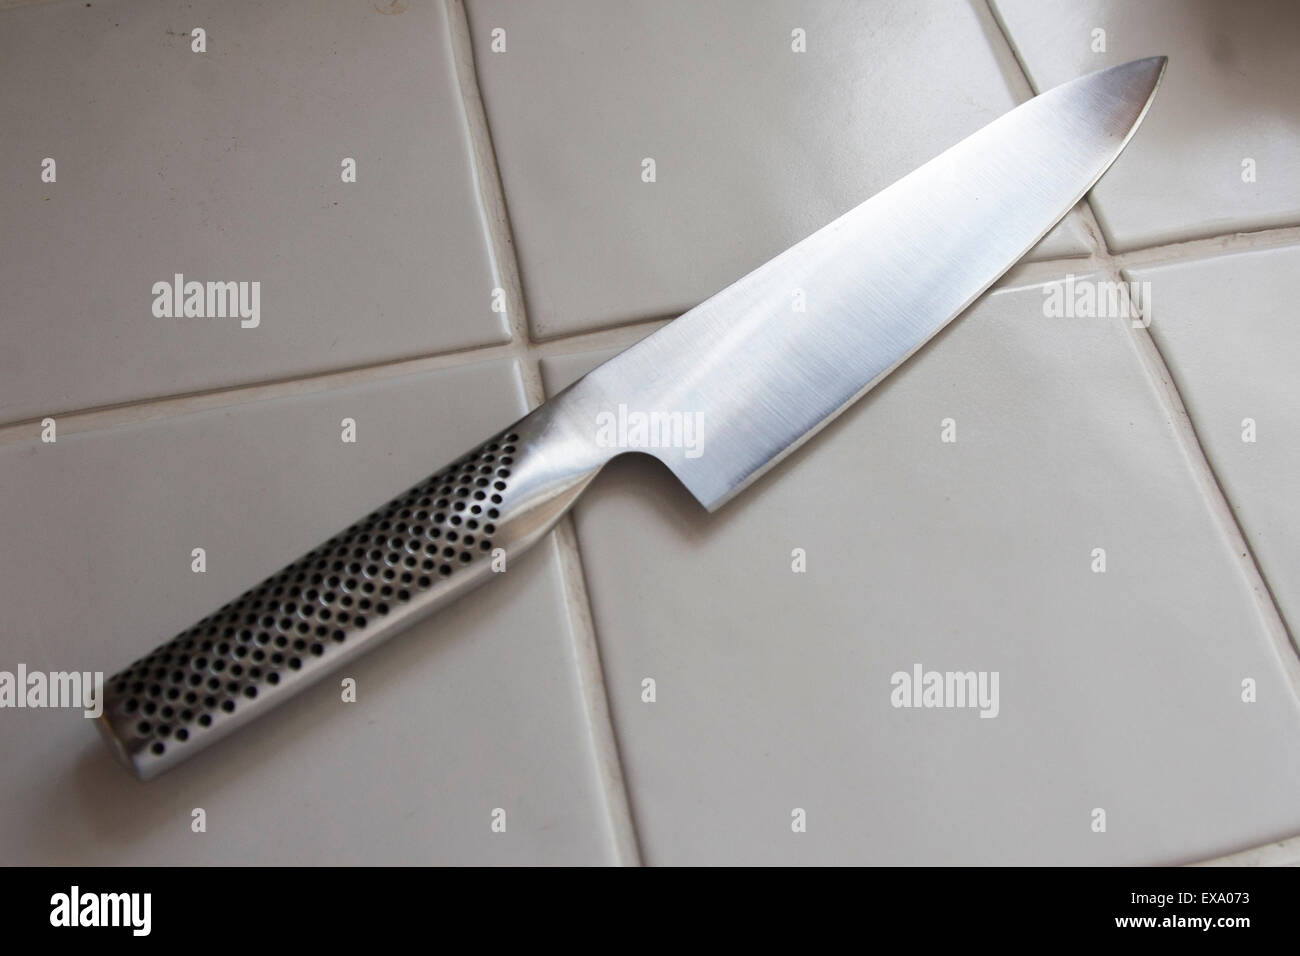 Chef's knife on the kitchen counter. Stock Photo